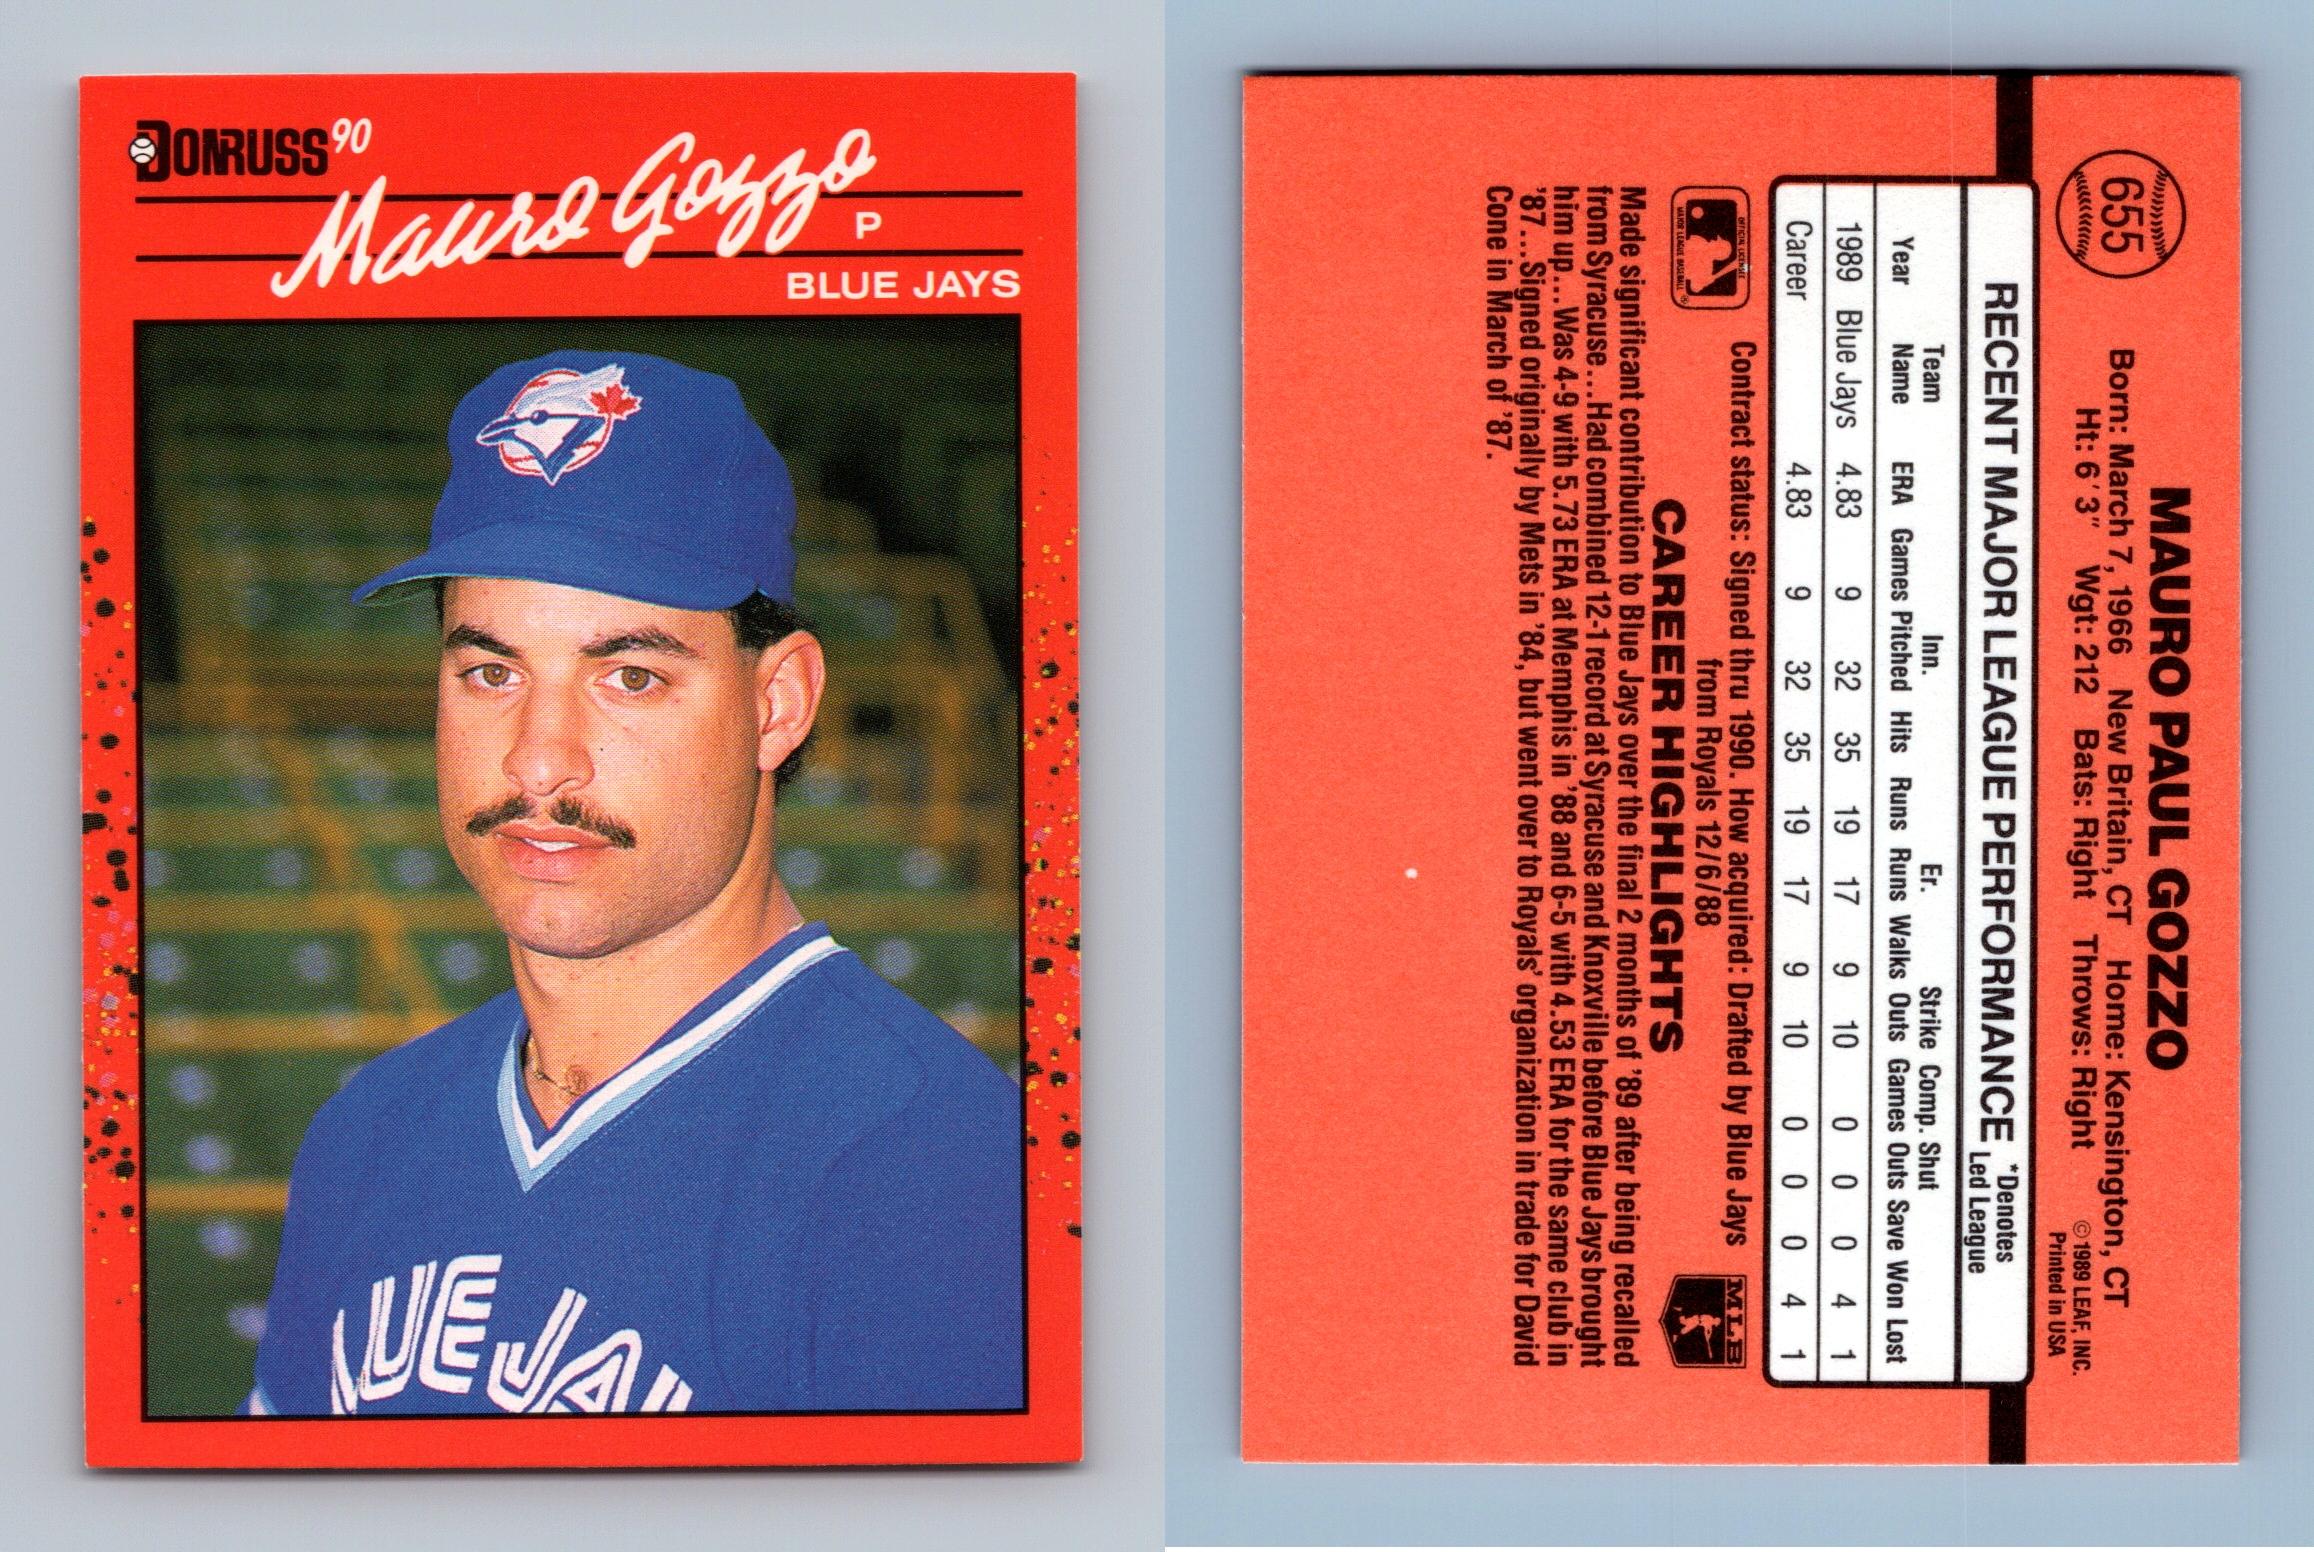 In The Cards: 1990 Medicine Hat Blue Jays – TALES OF BASEBALL